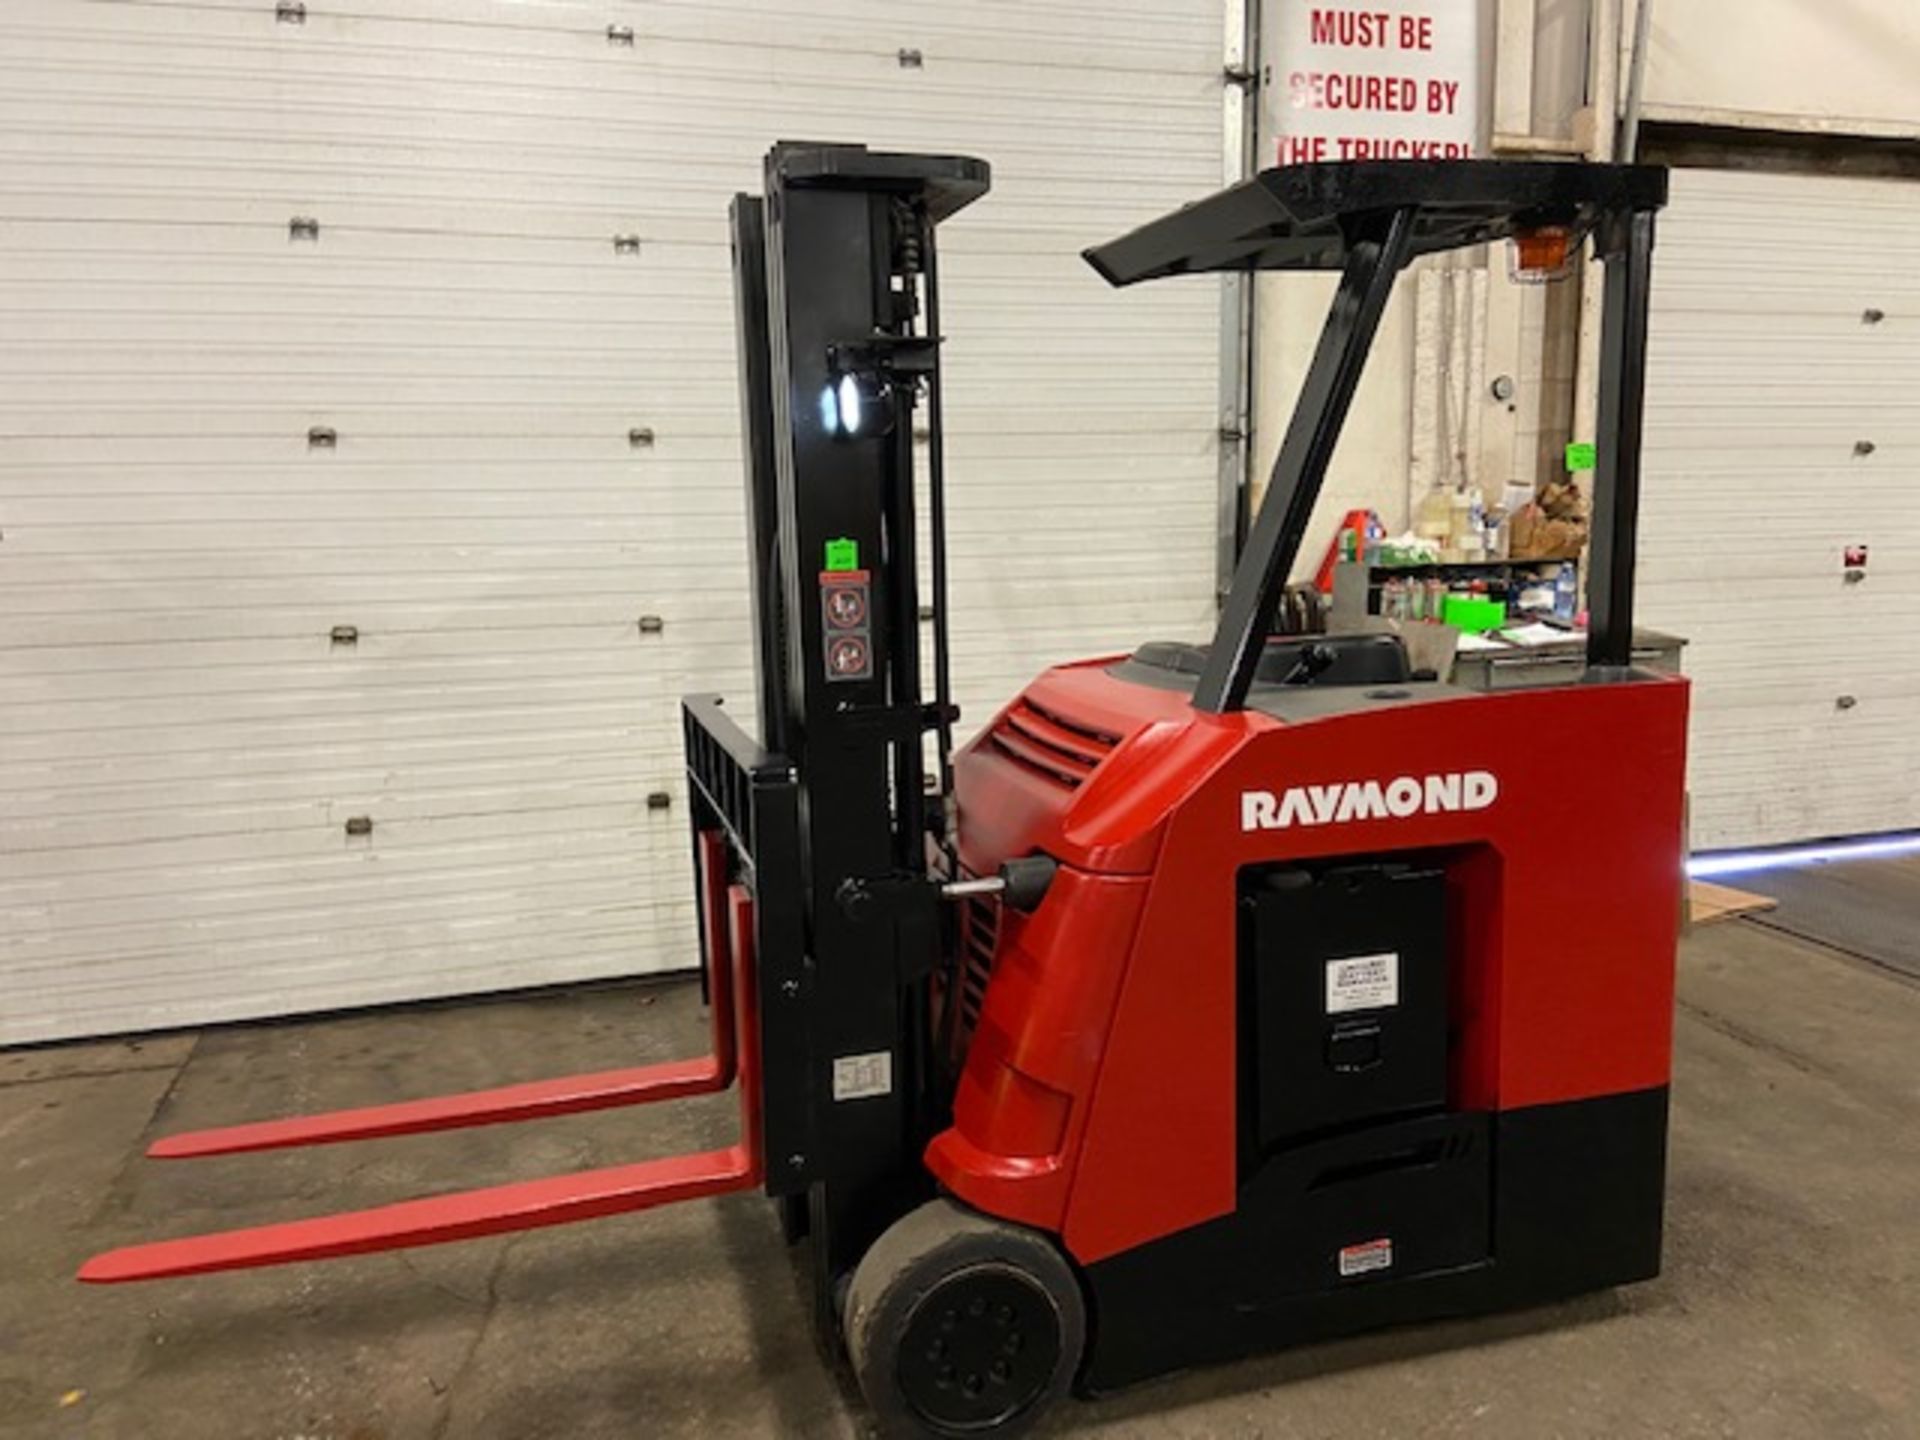 FREE CUSTOMS - 2013 Raymond 5000lbs Capacity Stand On Forklift Electric with 3-STAGE MAST sideshift